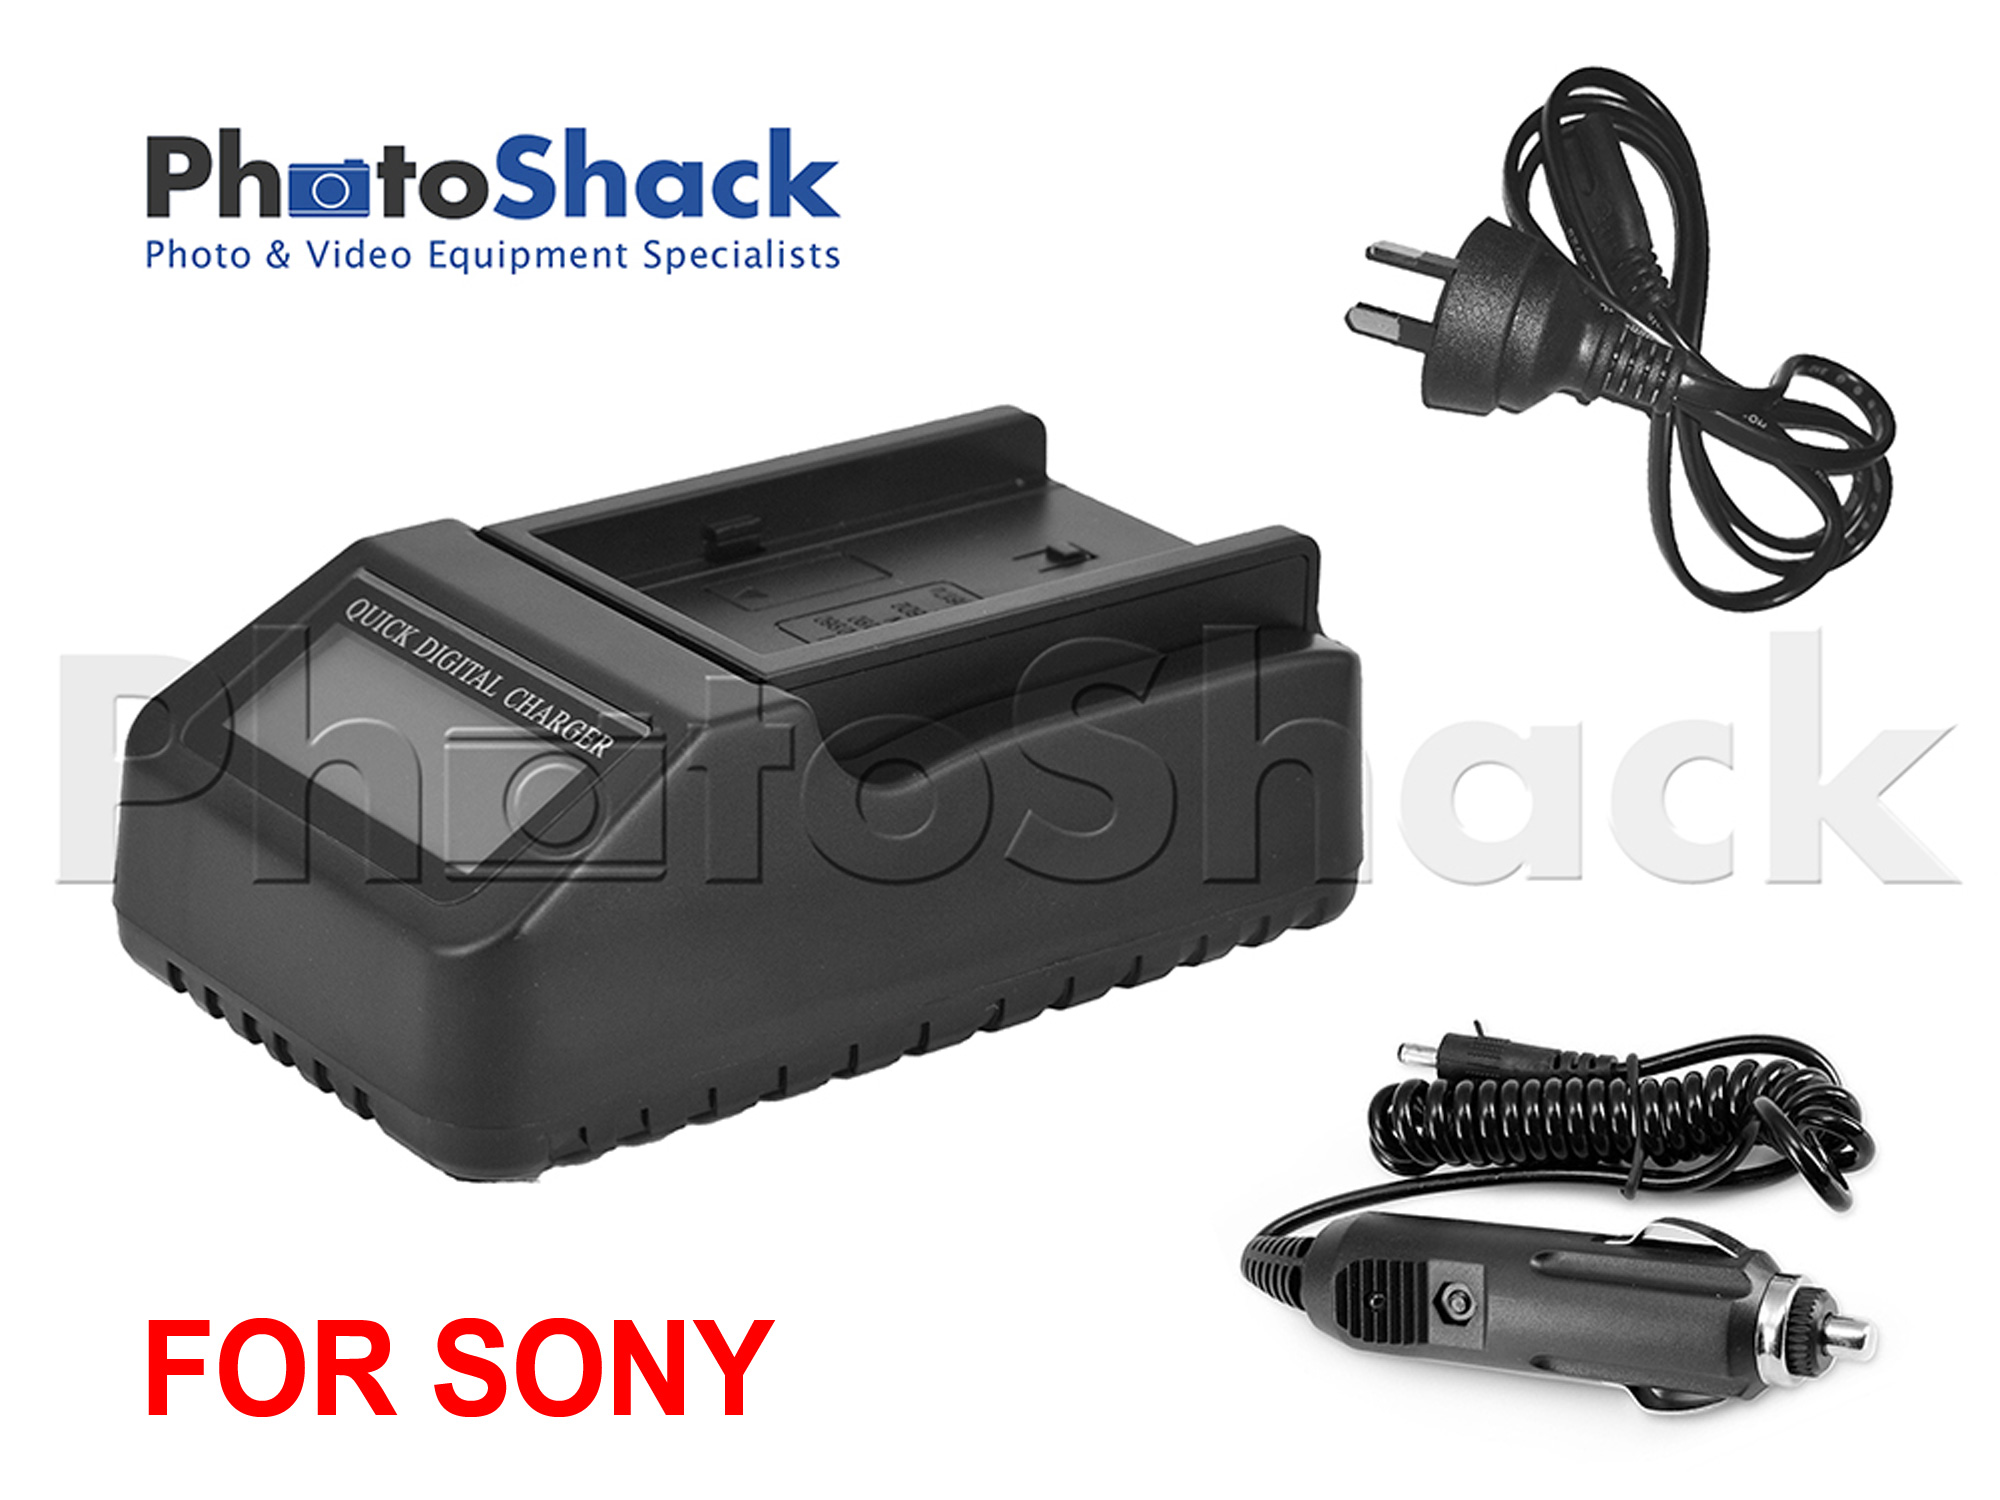 Multifunction Digital Charger with LCD Display & NZ power plug For Sony